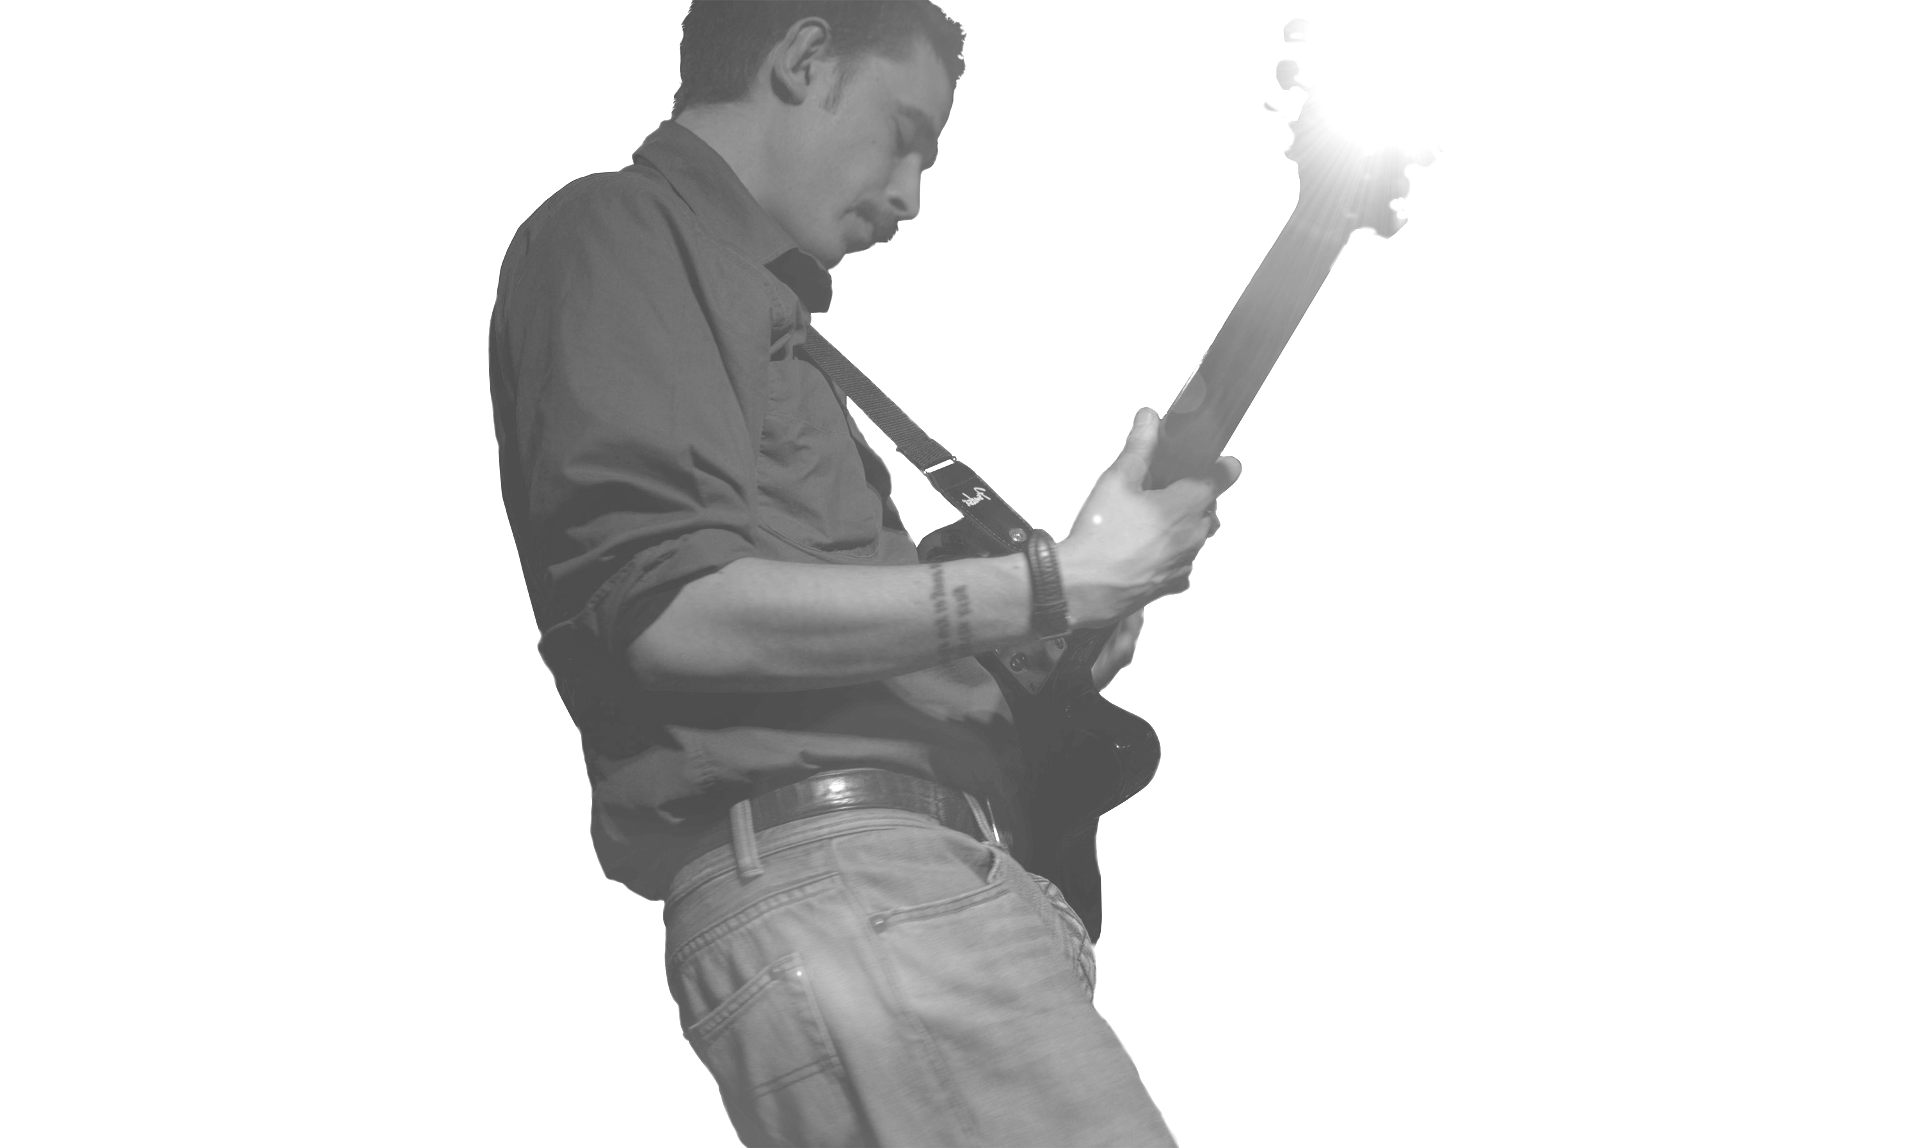 Sytlish black and white photo of musician/composer Marc Wencelius playing the electric guitar. Photo credited to Musicos Productions. Design by Musicos Productions